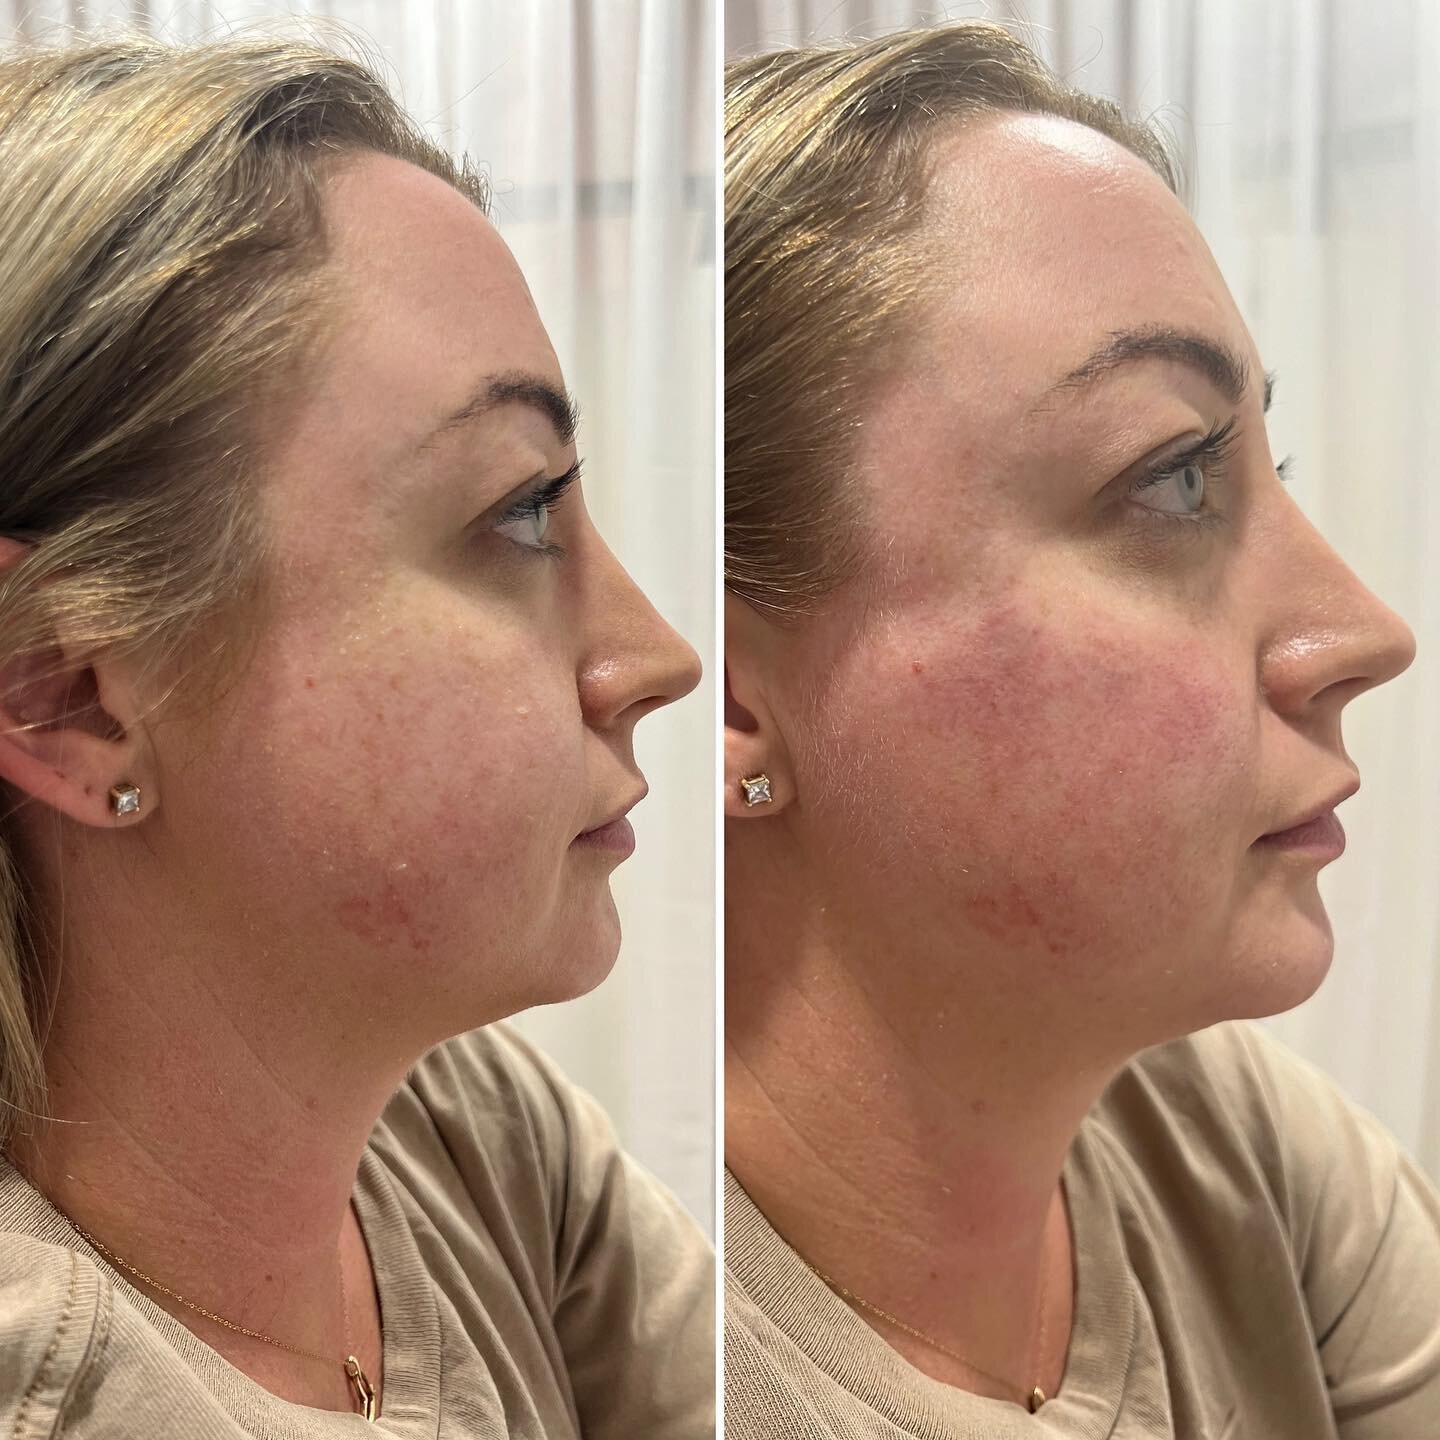 Are you wanting a defined side profile? 

Have you heard of the Esthetic Plane?

When we look at what is &ldquo;ideal&rdquo; and what we are looking to find, it really is about symmetry and balance. 

Dr Robert Ricketts was able to define a specific 